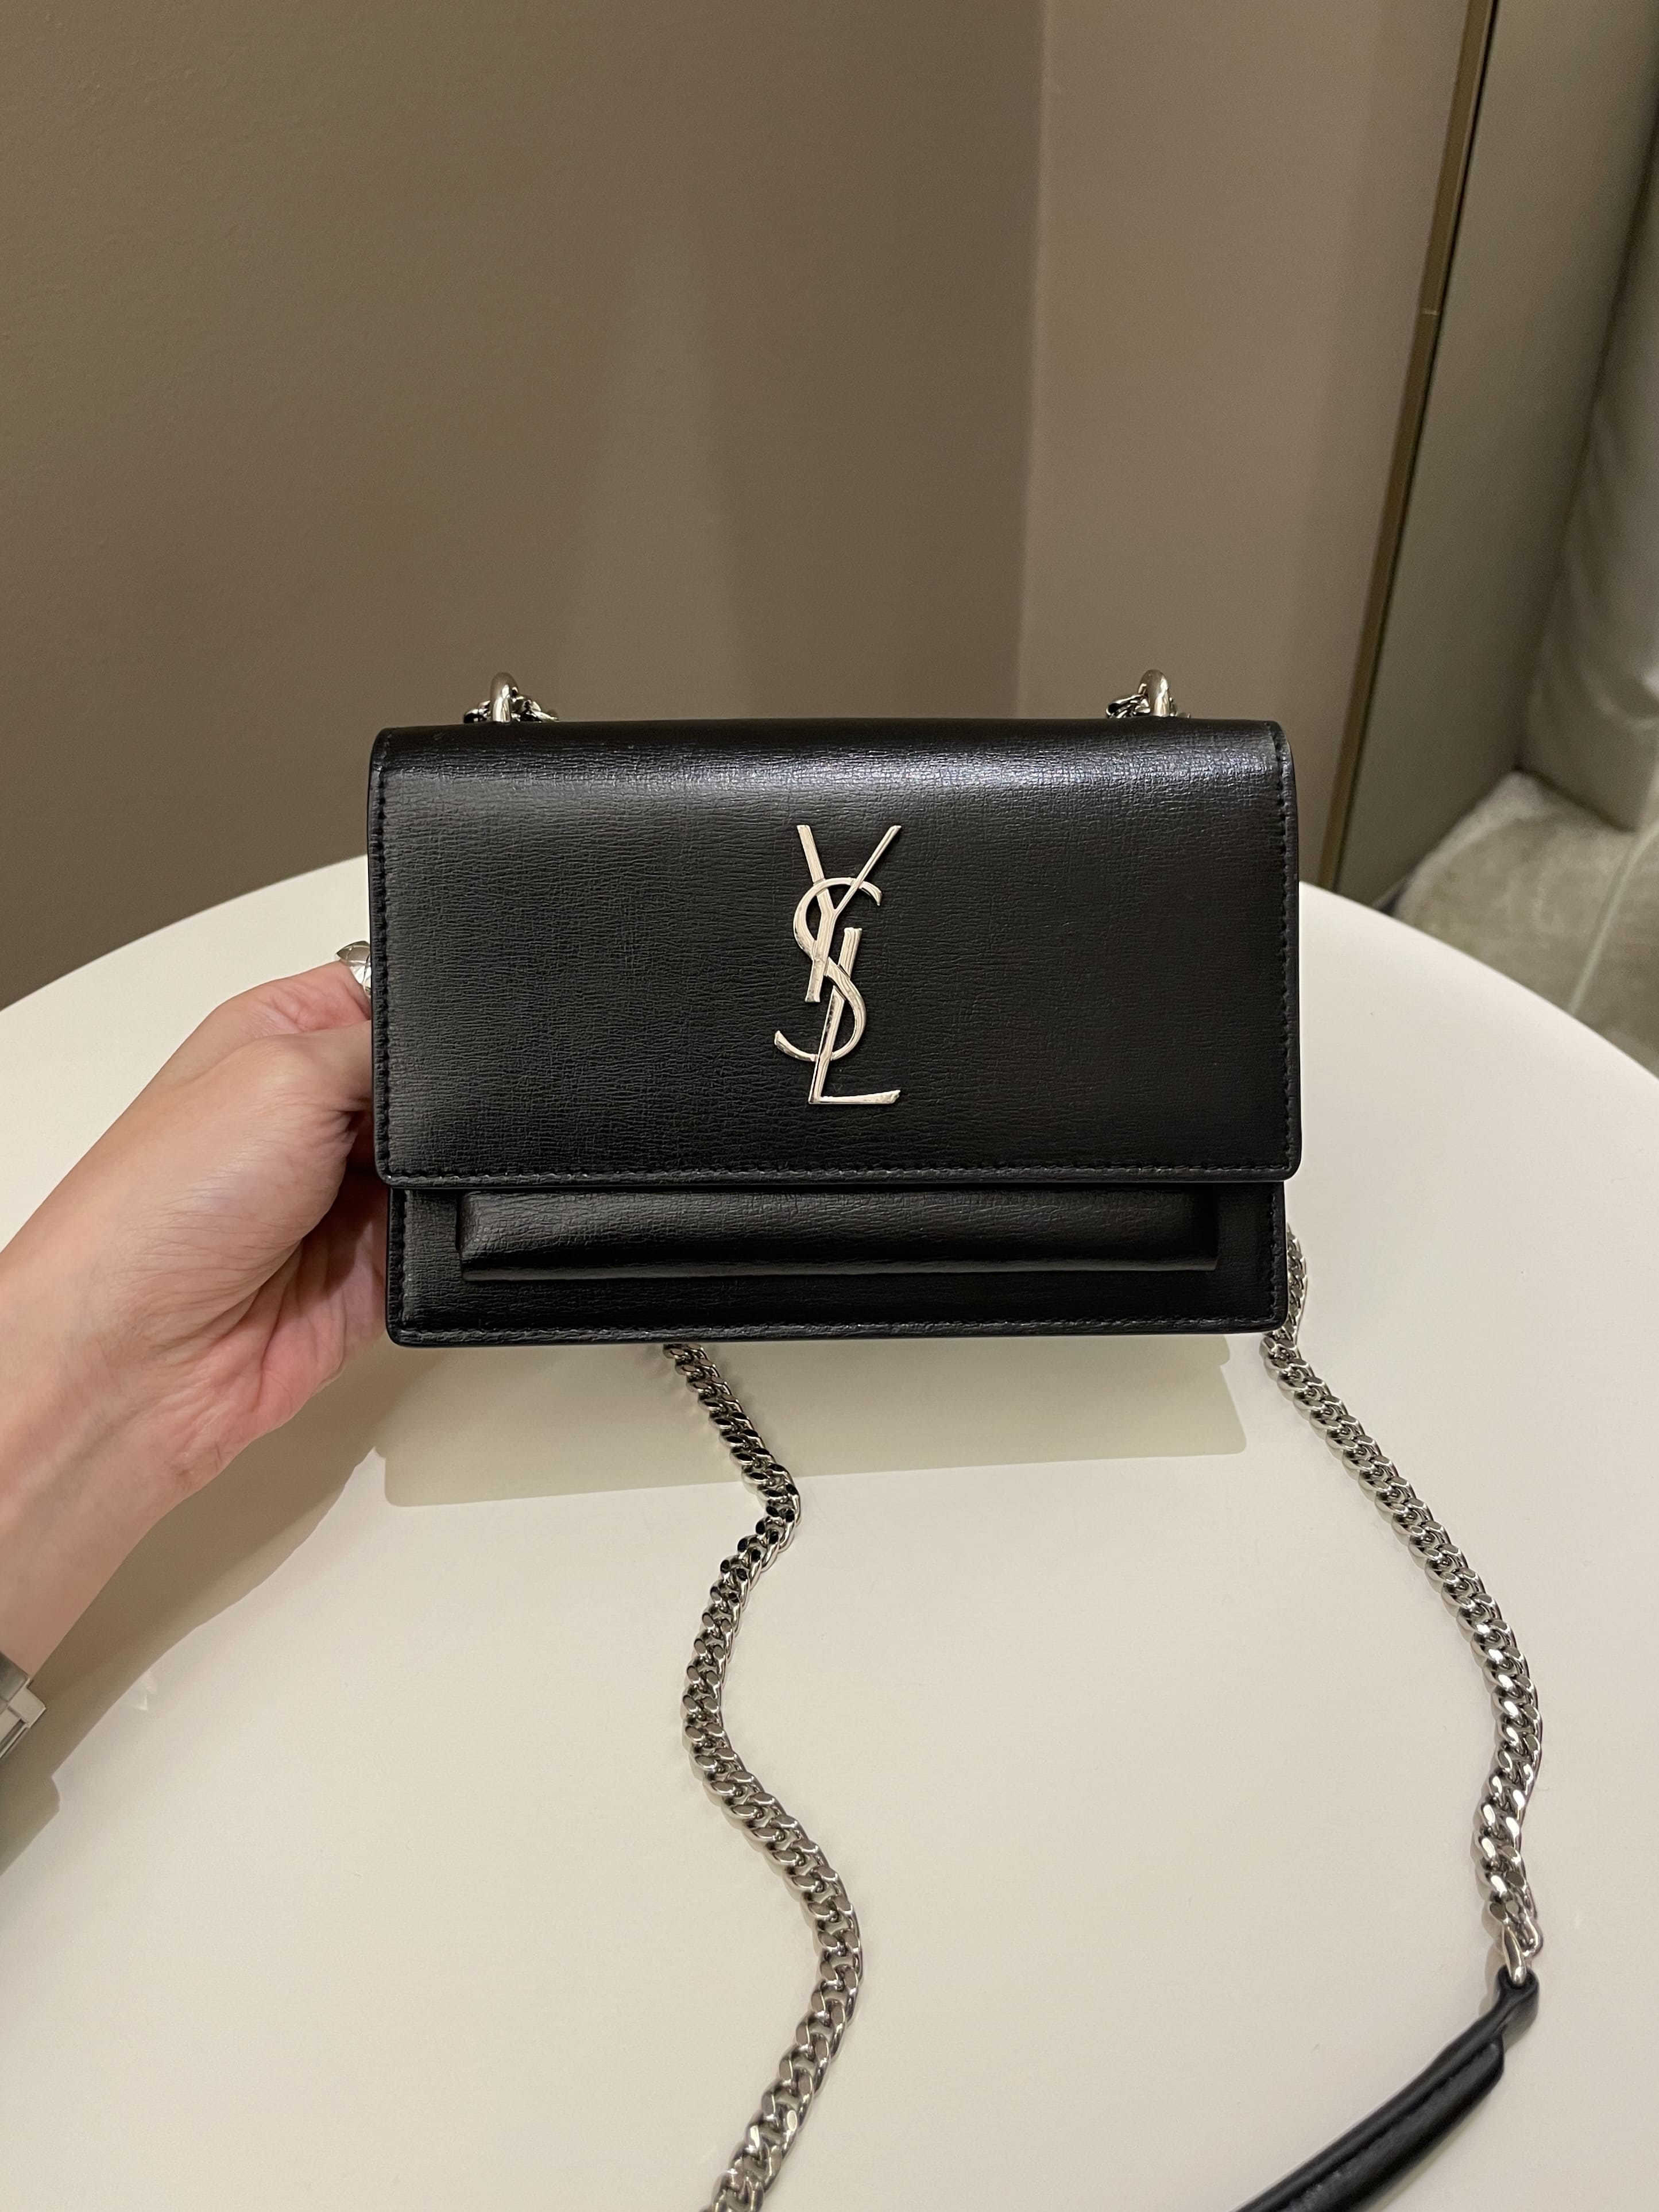 SAINT LAURENT 2090$ Small Sunset Chain Wallet In Black Coated Bark Leather